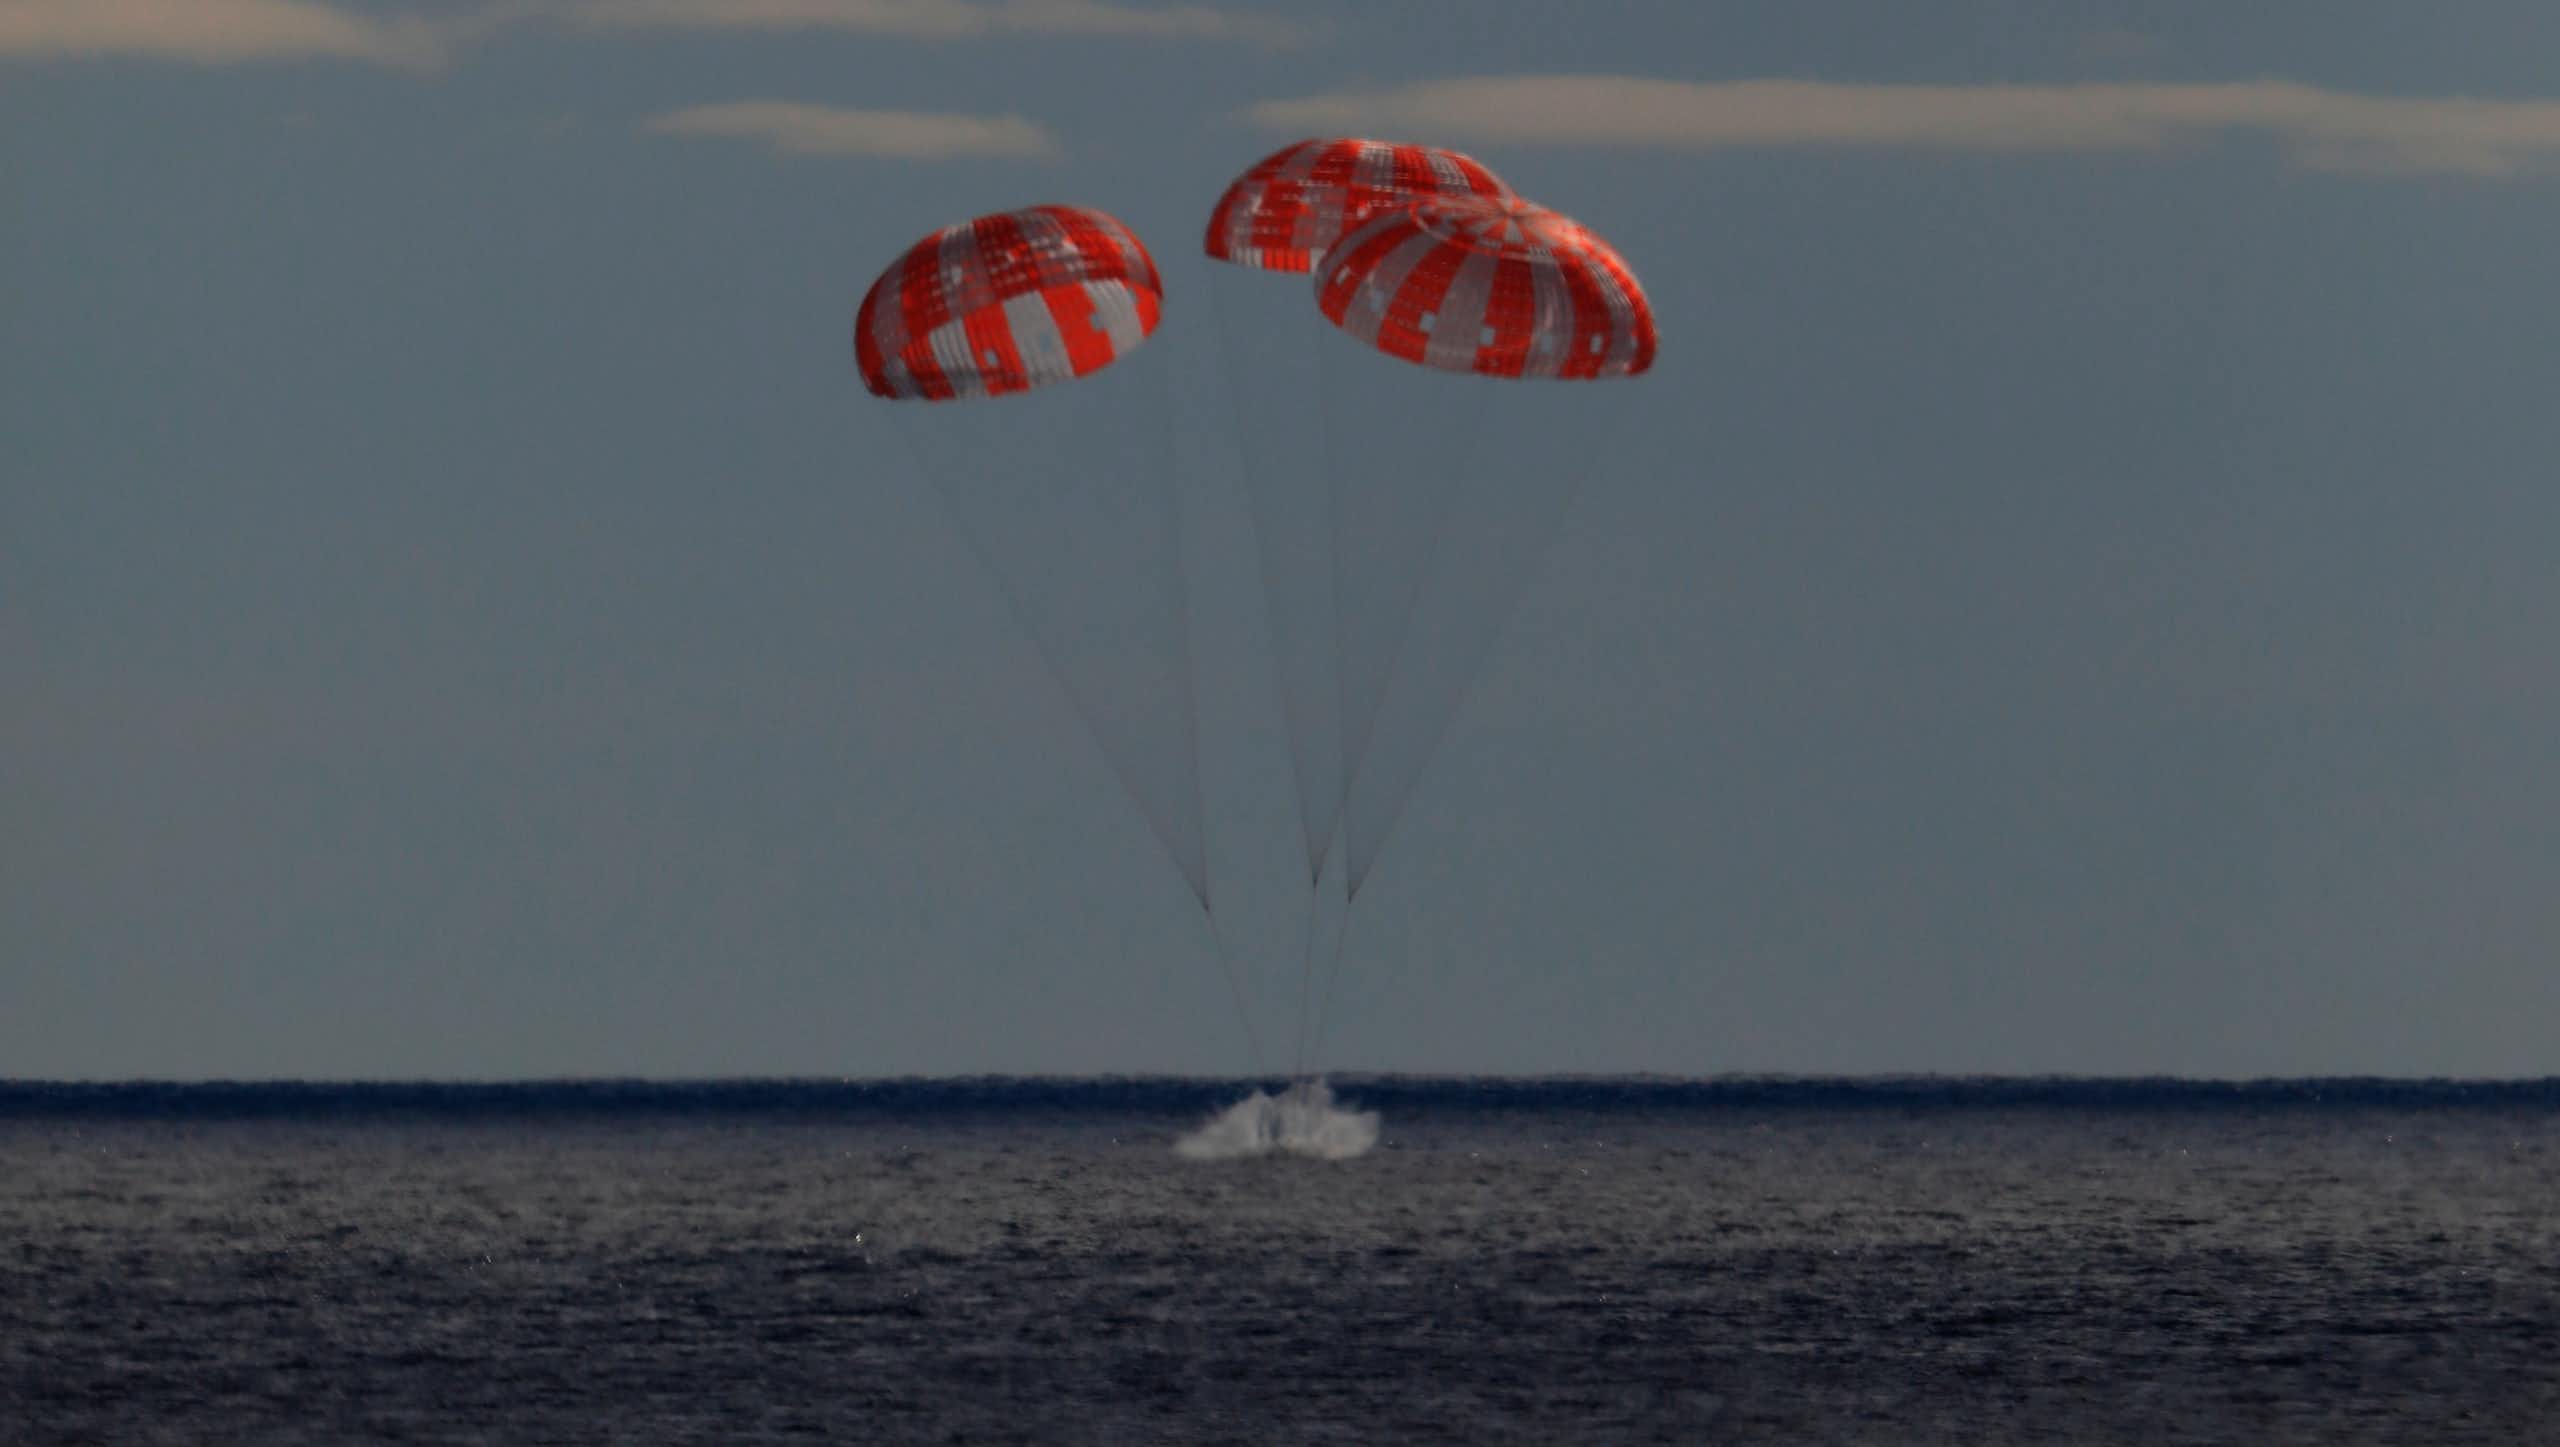 A small metal capsule carried by three parachutes lands in a body of water. 